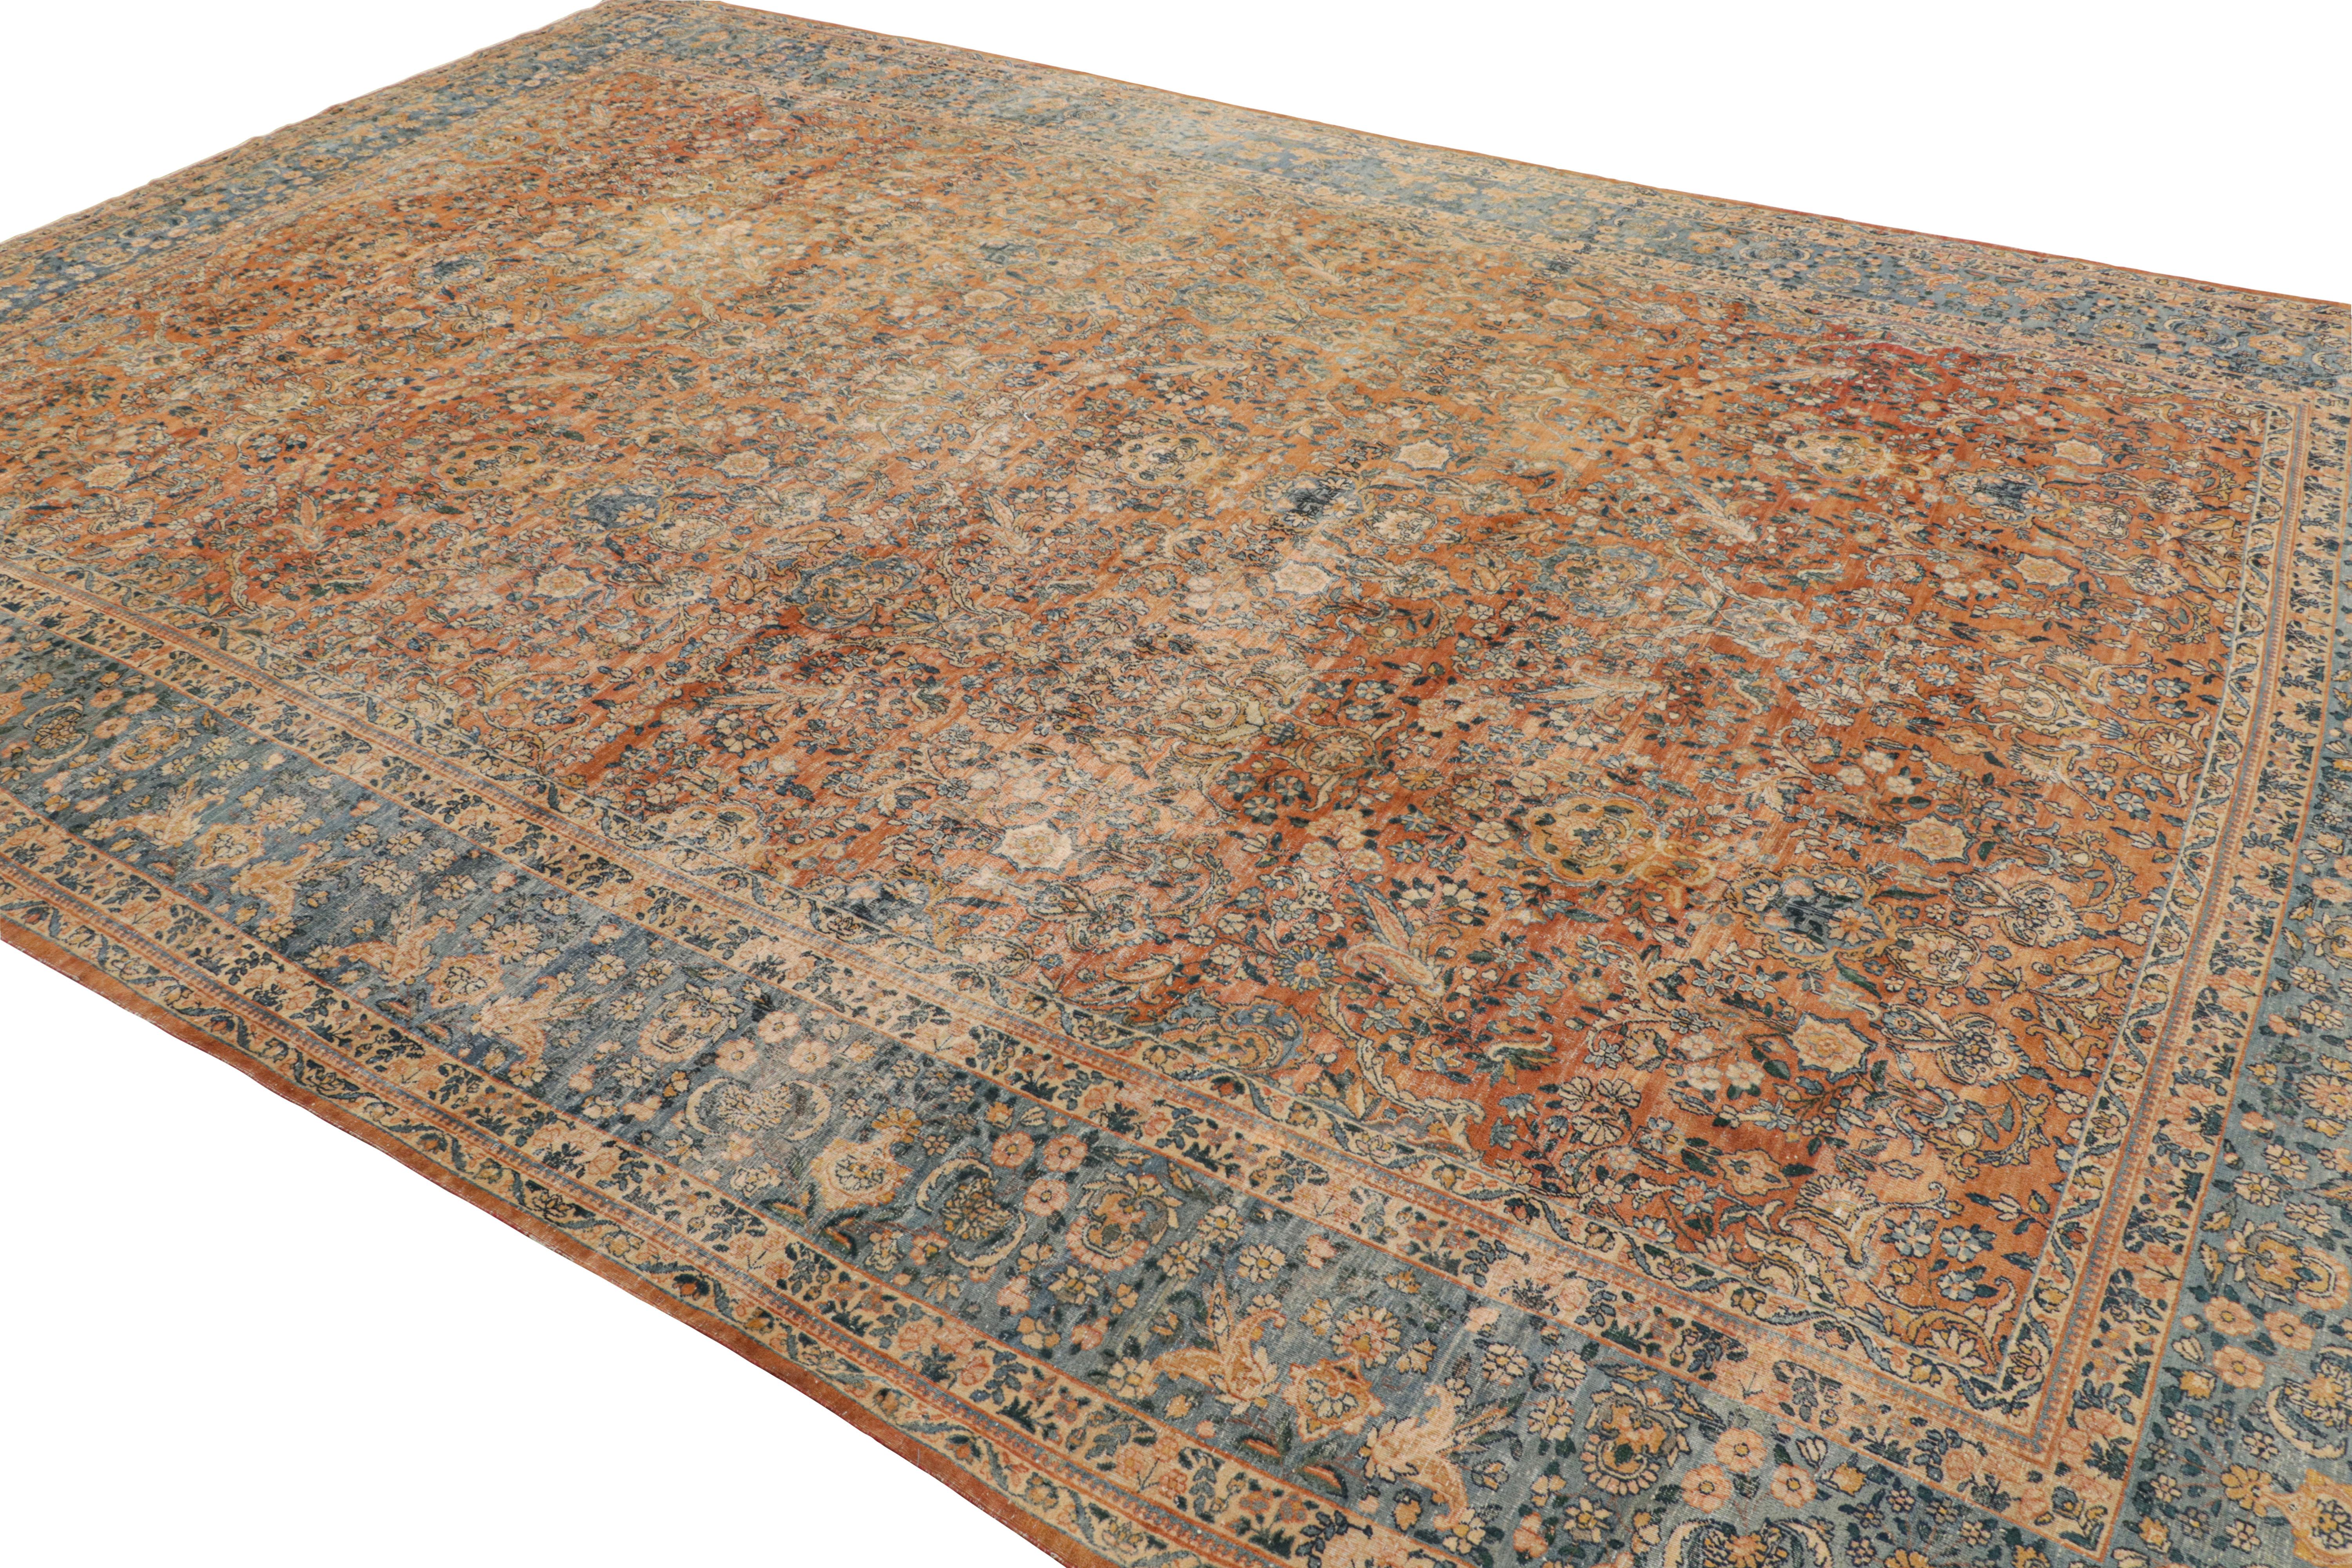 Antique Kerman Lavar Orange-Brown & Blue Wool Persian Floral Rug by Rug & Kilim In Good Condition For Sale In Long Island City, NY